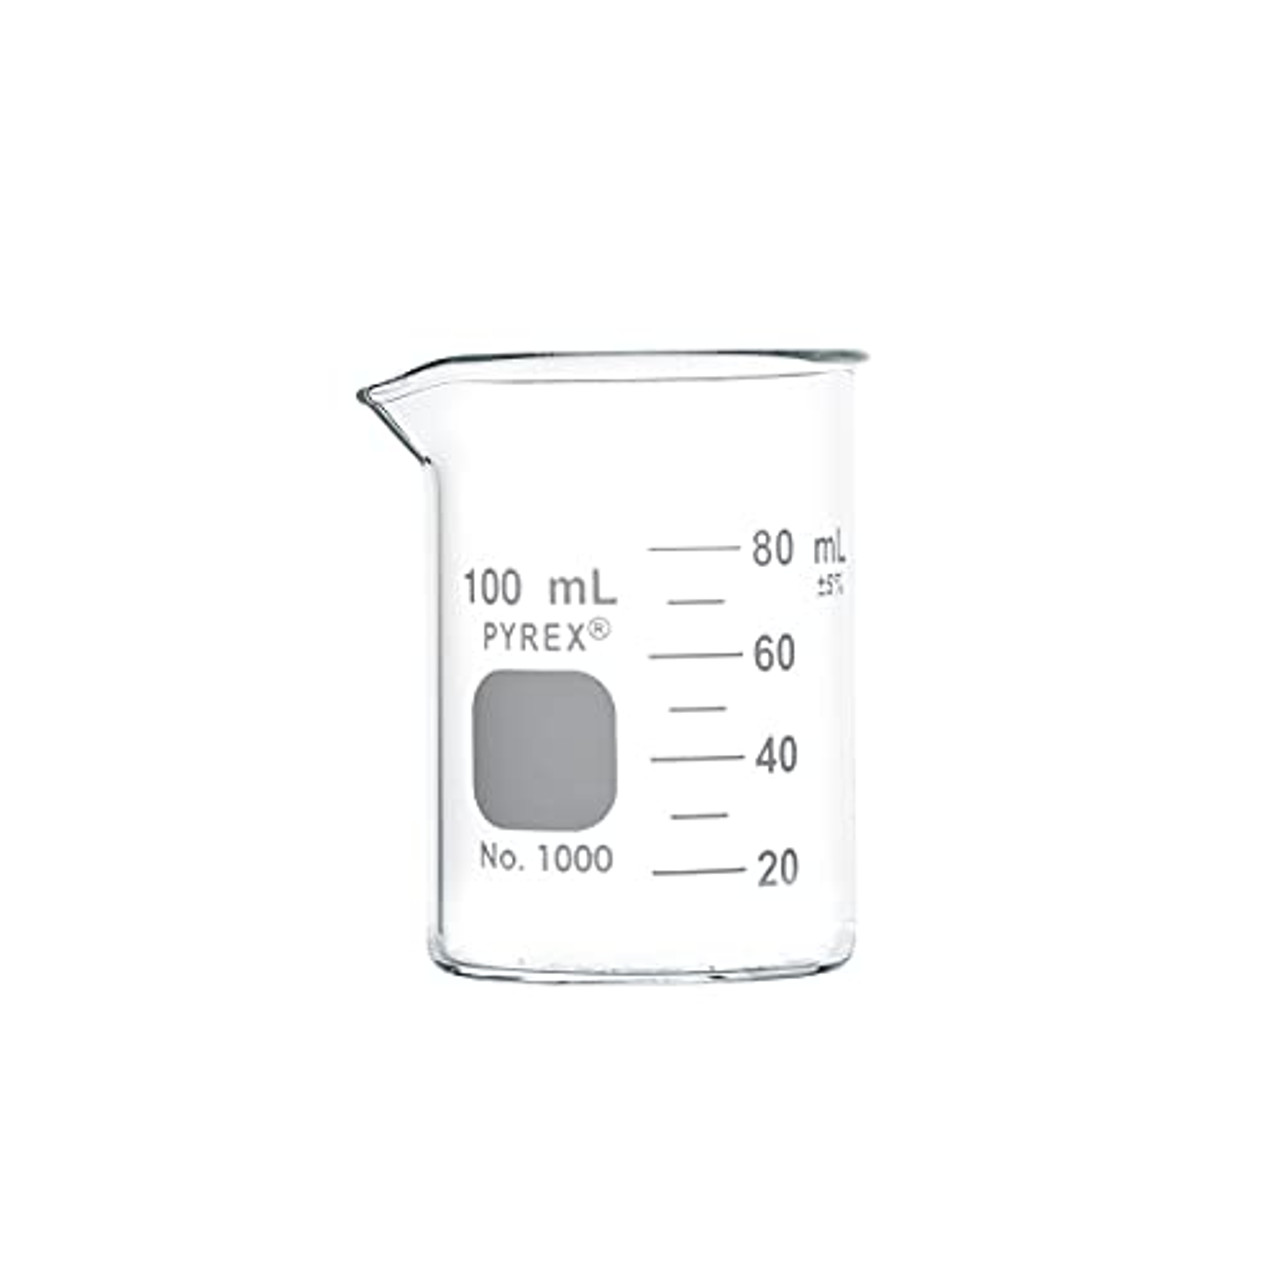 Pyrex low form Griffin 150ml clear borosilicate glass beaker